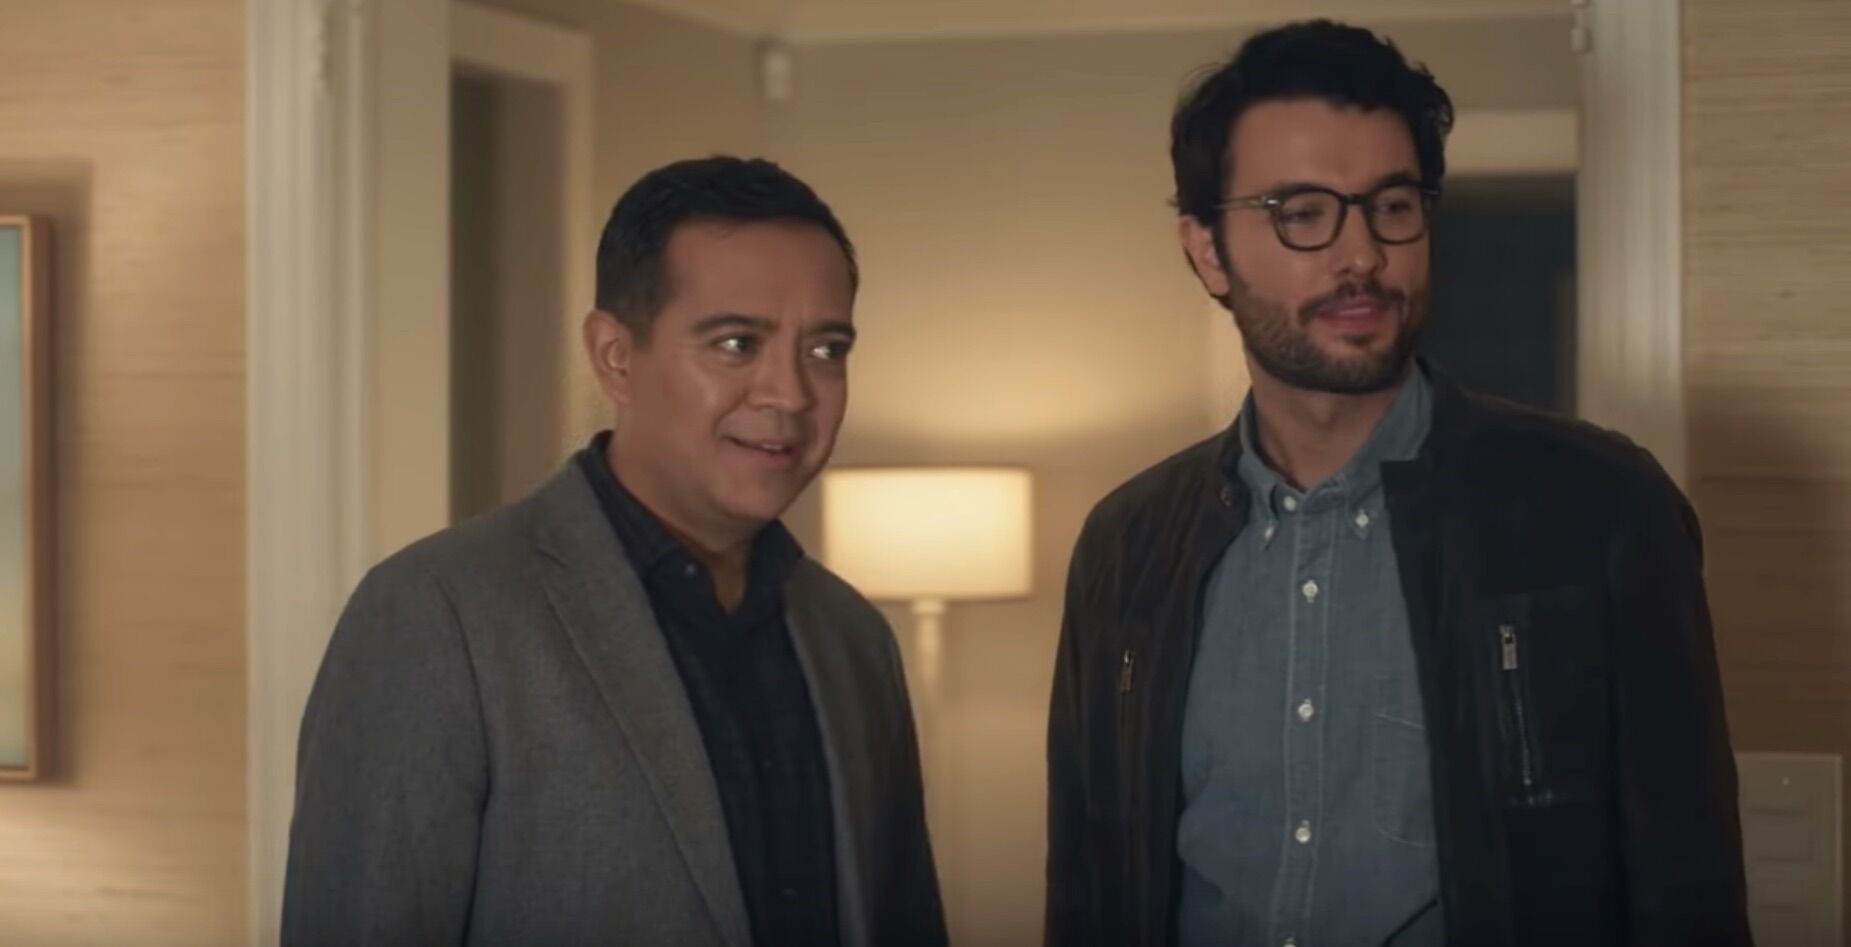 This gay couple in an AT&T commercial has an evangelical hate group up in arms.